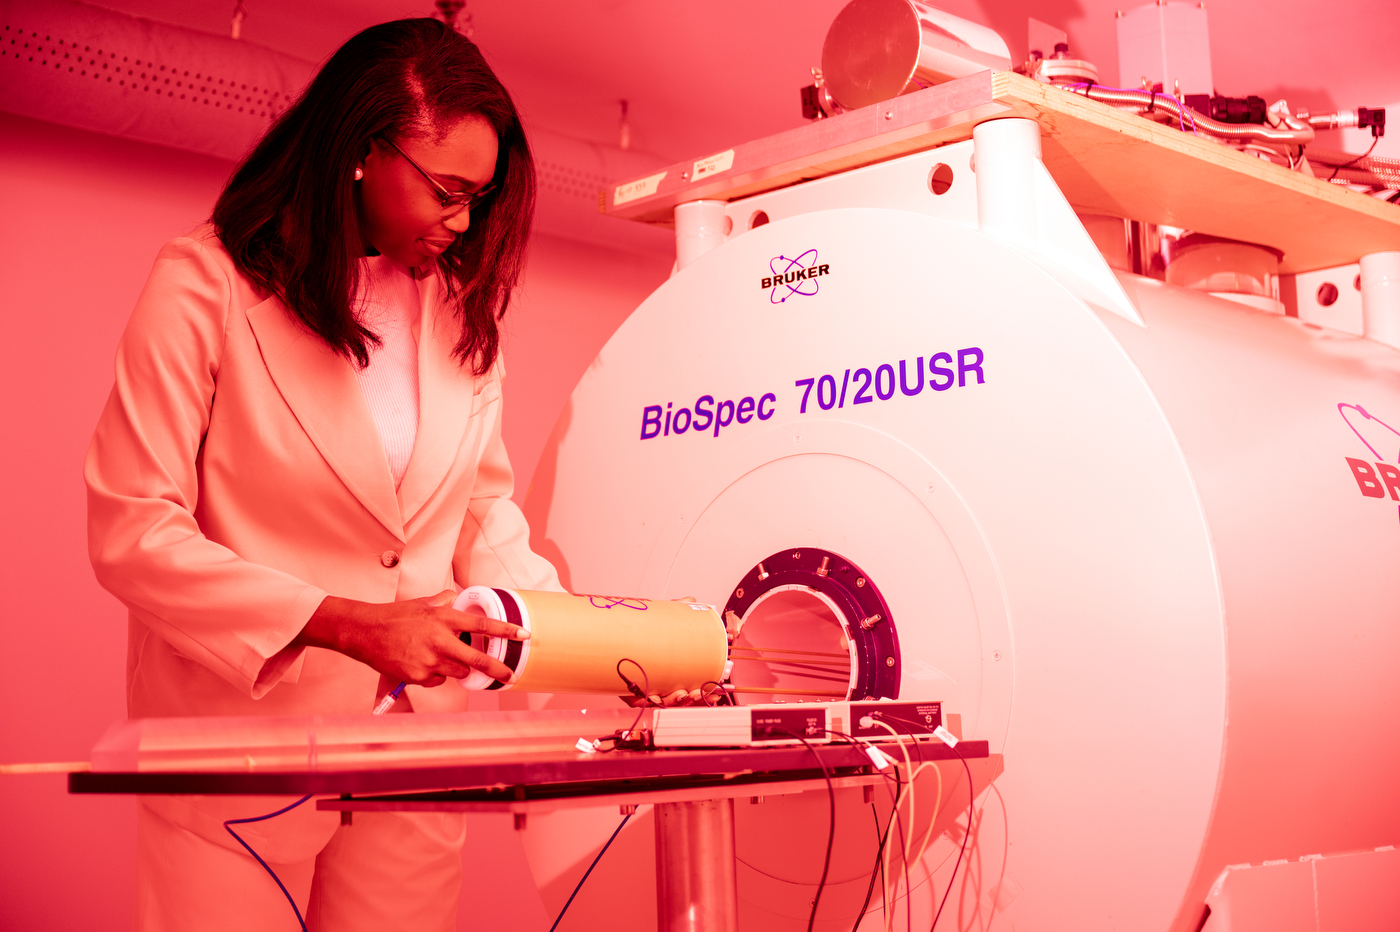 A person wearing a lab coat works with a white machine in a red-lit room.